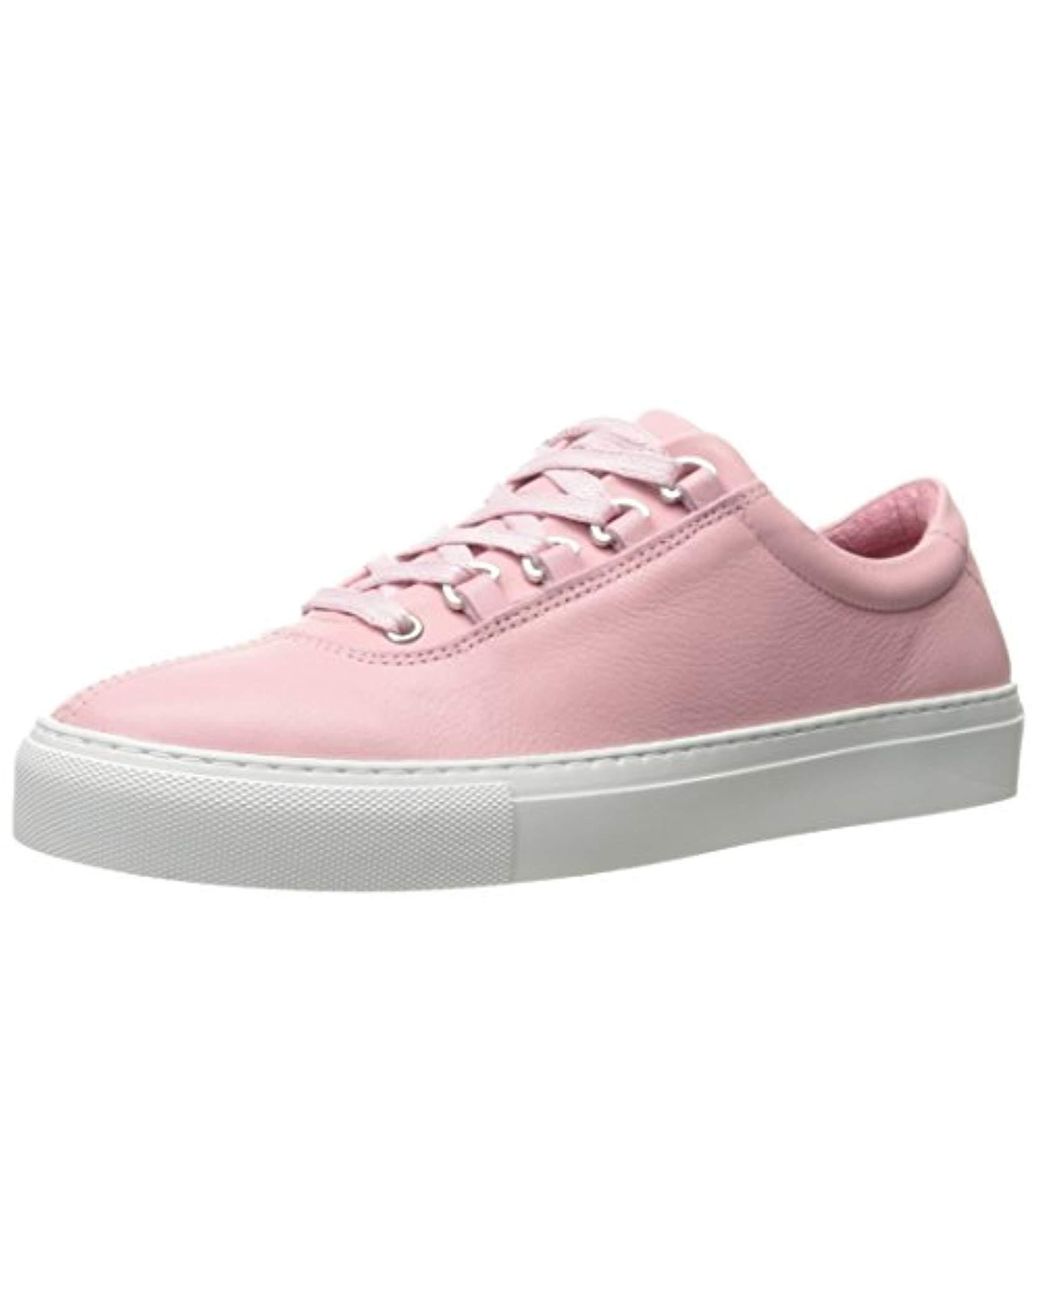 K-swiss Court Classico Fashion Sneaker in Pink - Save 70% - Lyst